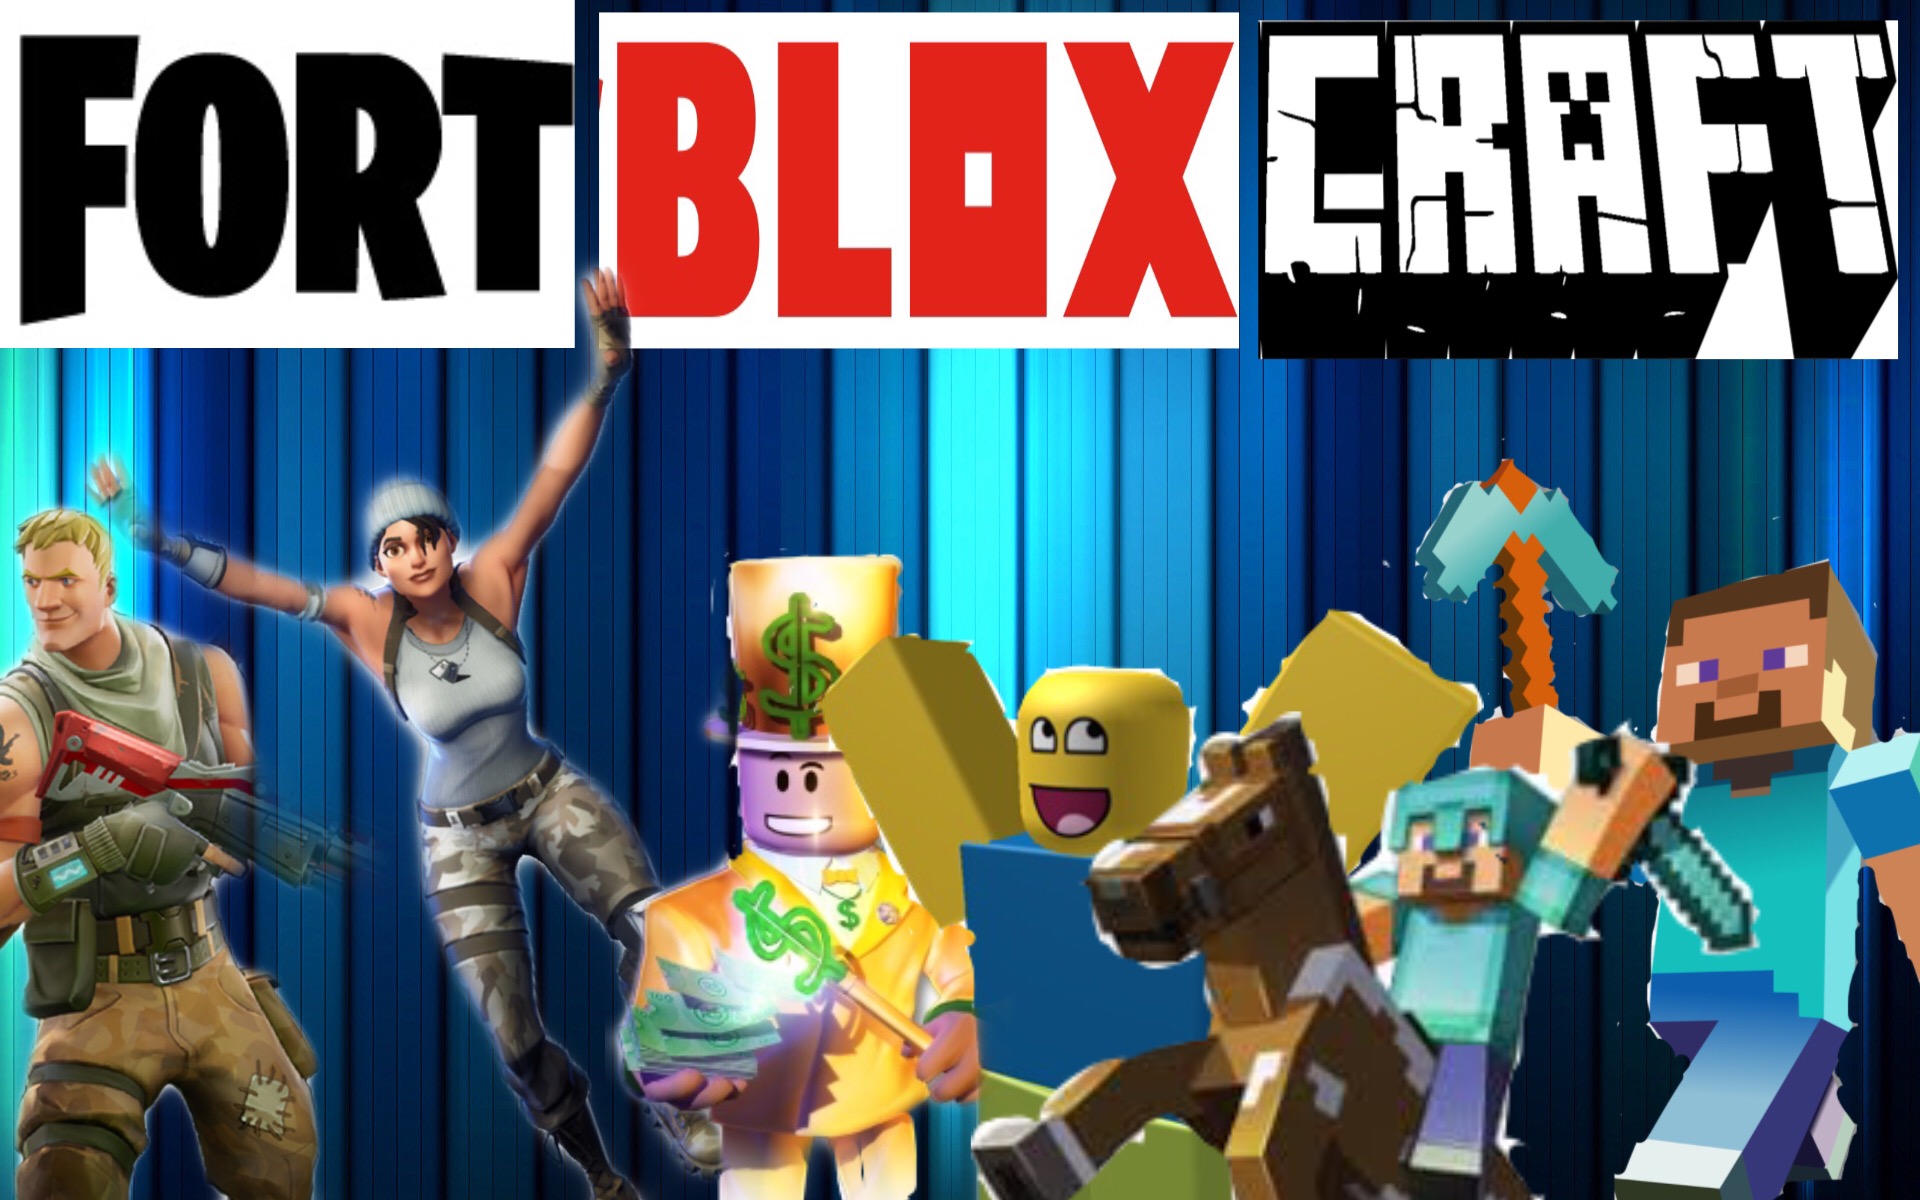 Fortnite Roblox Image By Adriennemont - roblox fortnite image